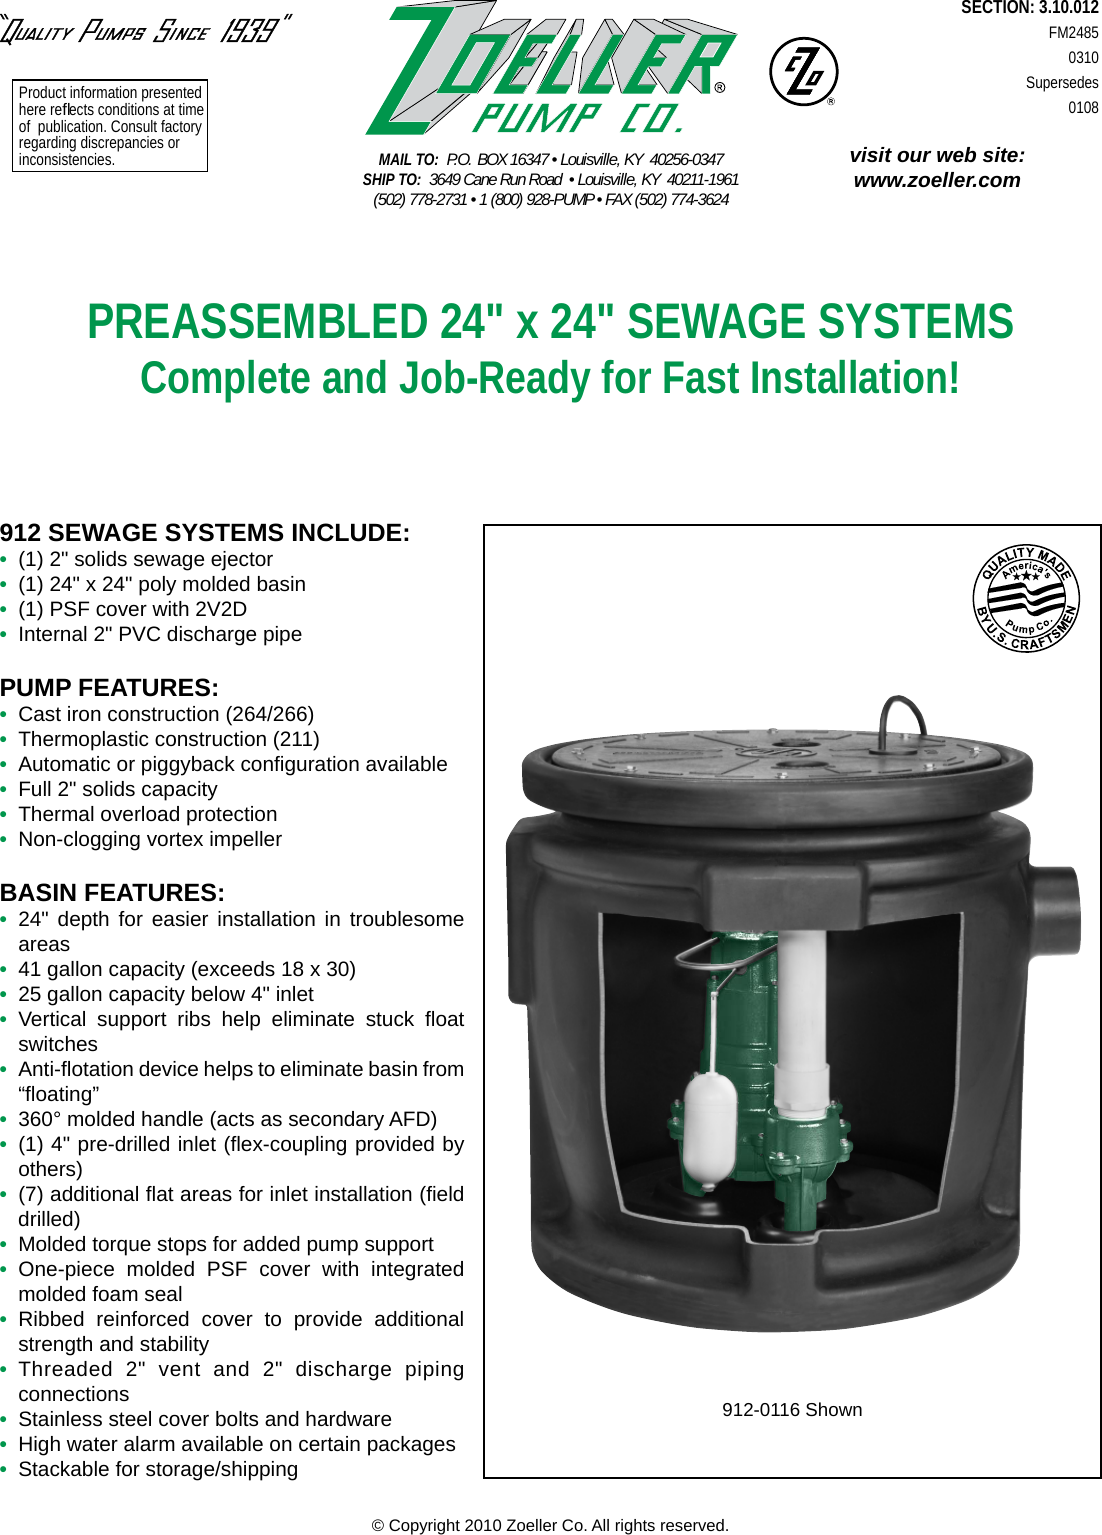 Page 1 of 2 - 196 1 Zoeller 912 Product Brochure Fm2485-Preassembled 24 X Sewage Systems User Manual